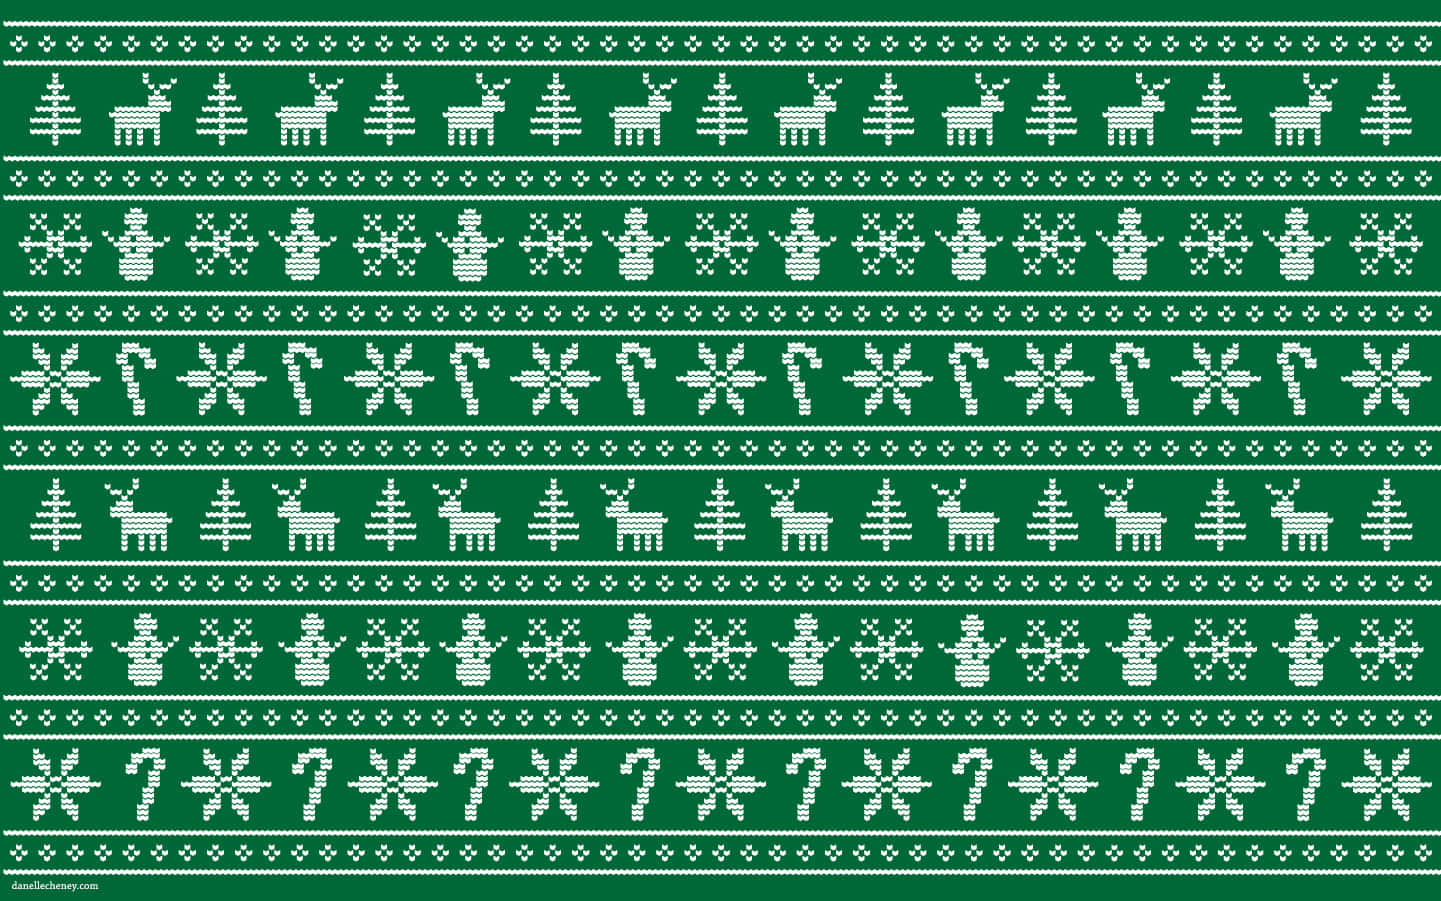 Recurring Pattern In An Array On A Green Sweater Wallpaper